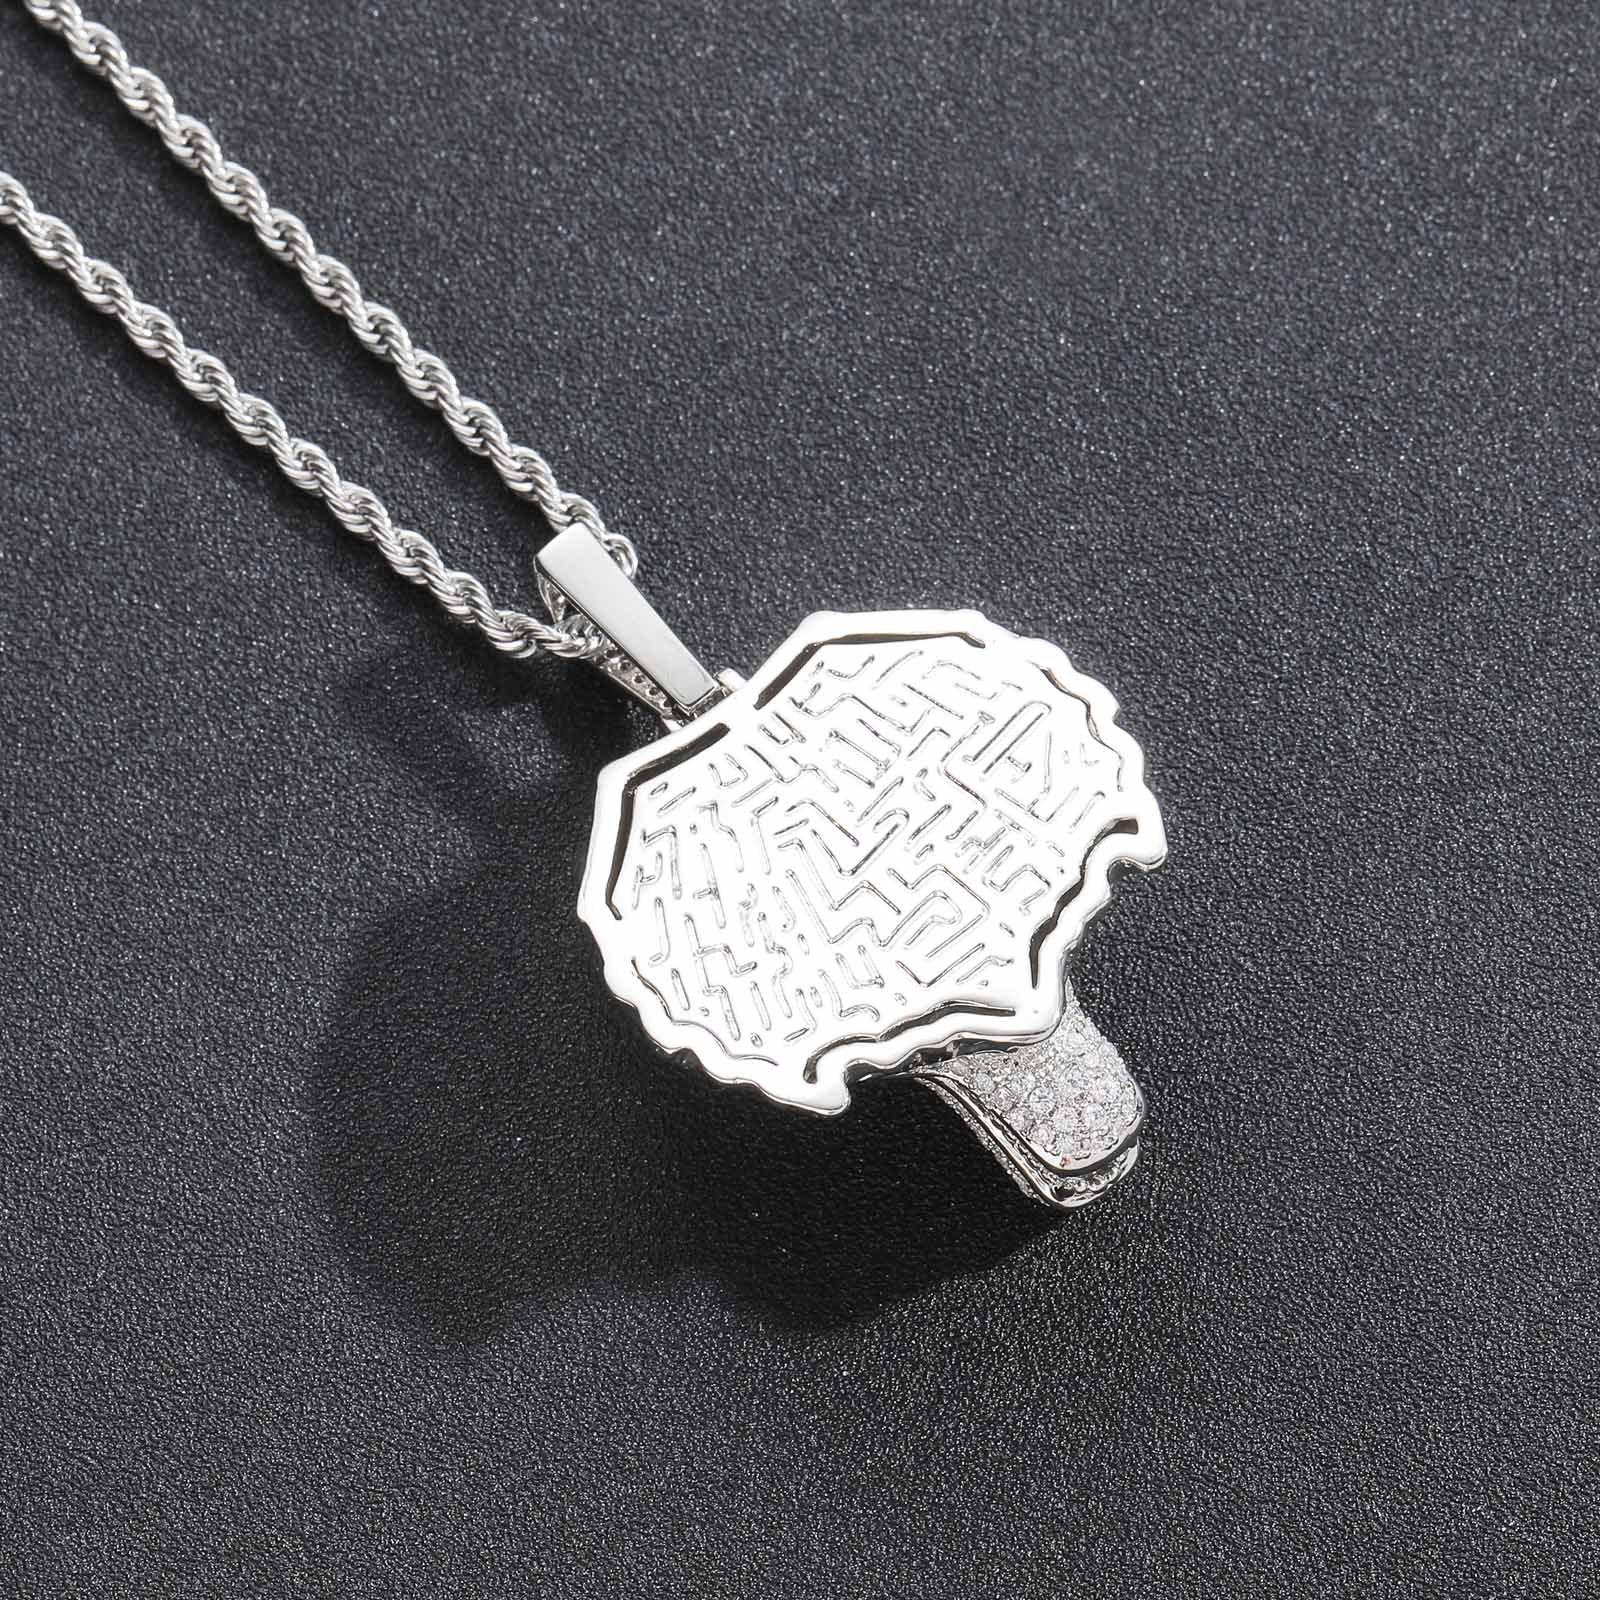 Hip Hop Retro 3D Wolf Head Pendant Necklace Cool Men Gift Full 5A Zircon 18k Real Gold Plated Jewelry